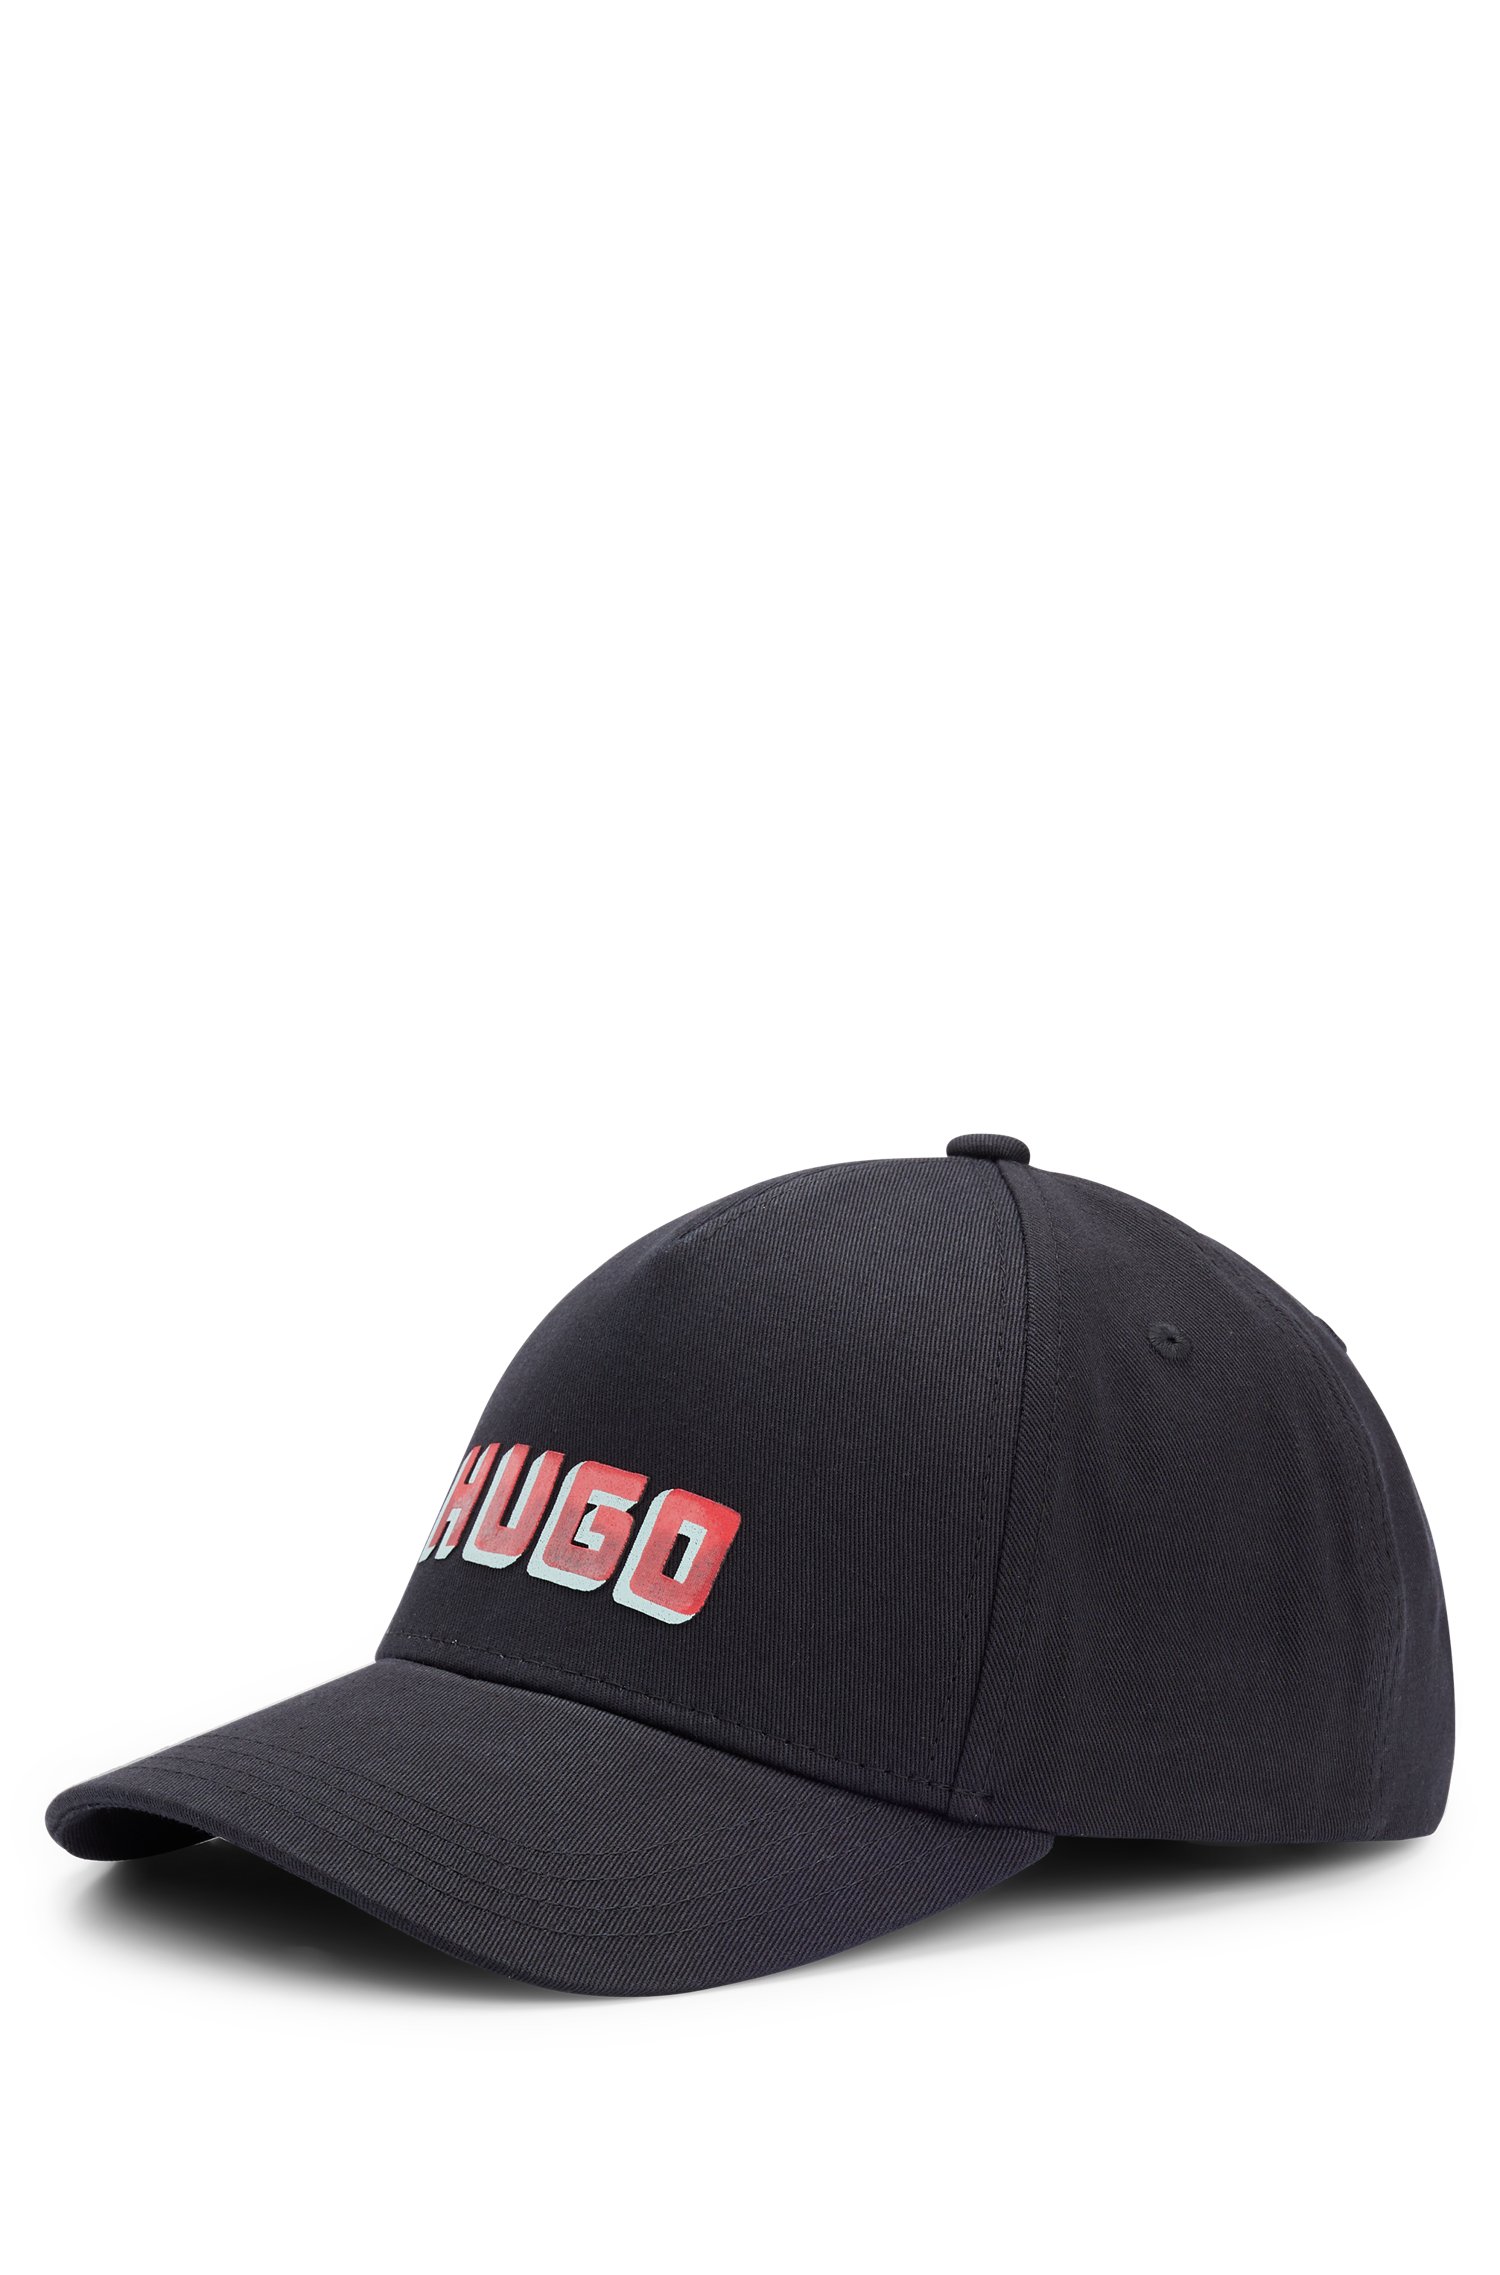 Cotton-twill five-panel cap with logo detail